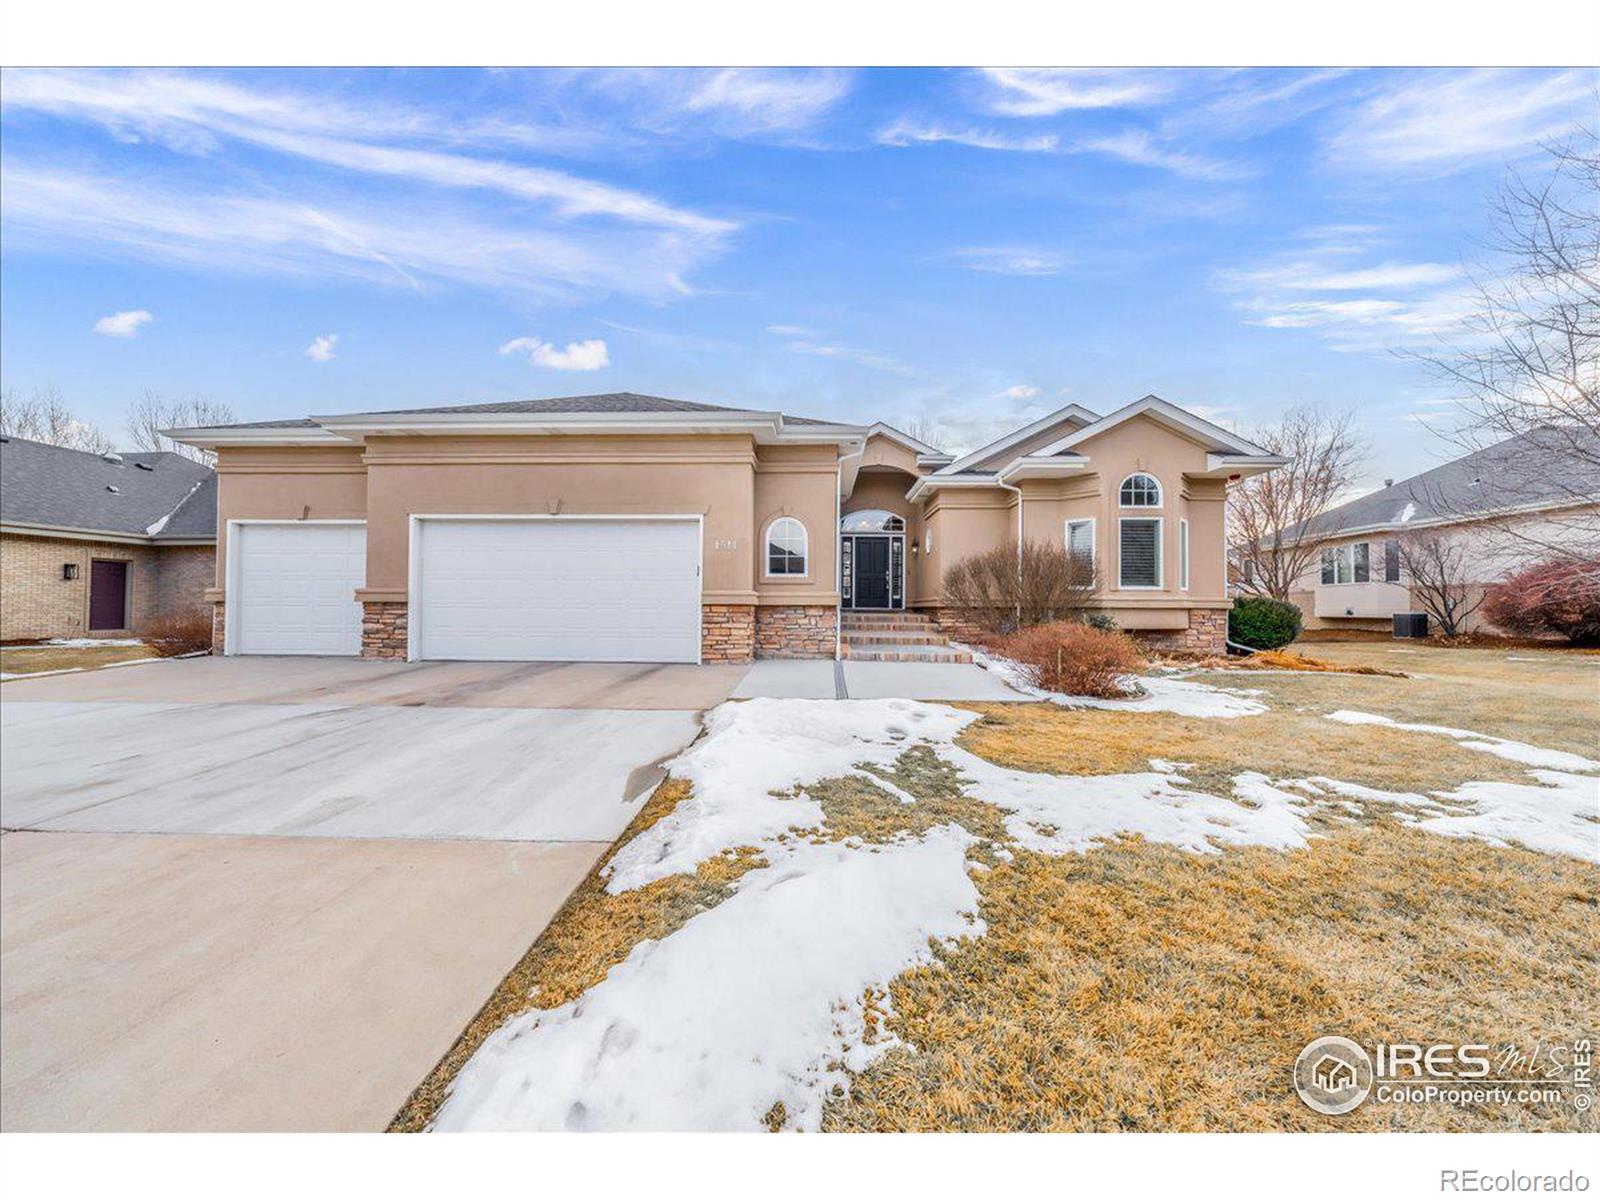 4514 W 14th St Dr, Greeley, CO 80634